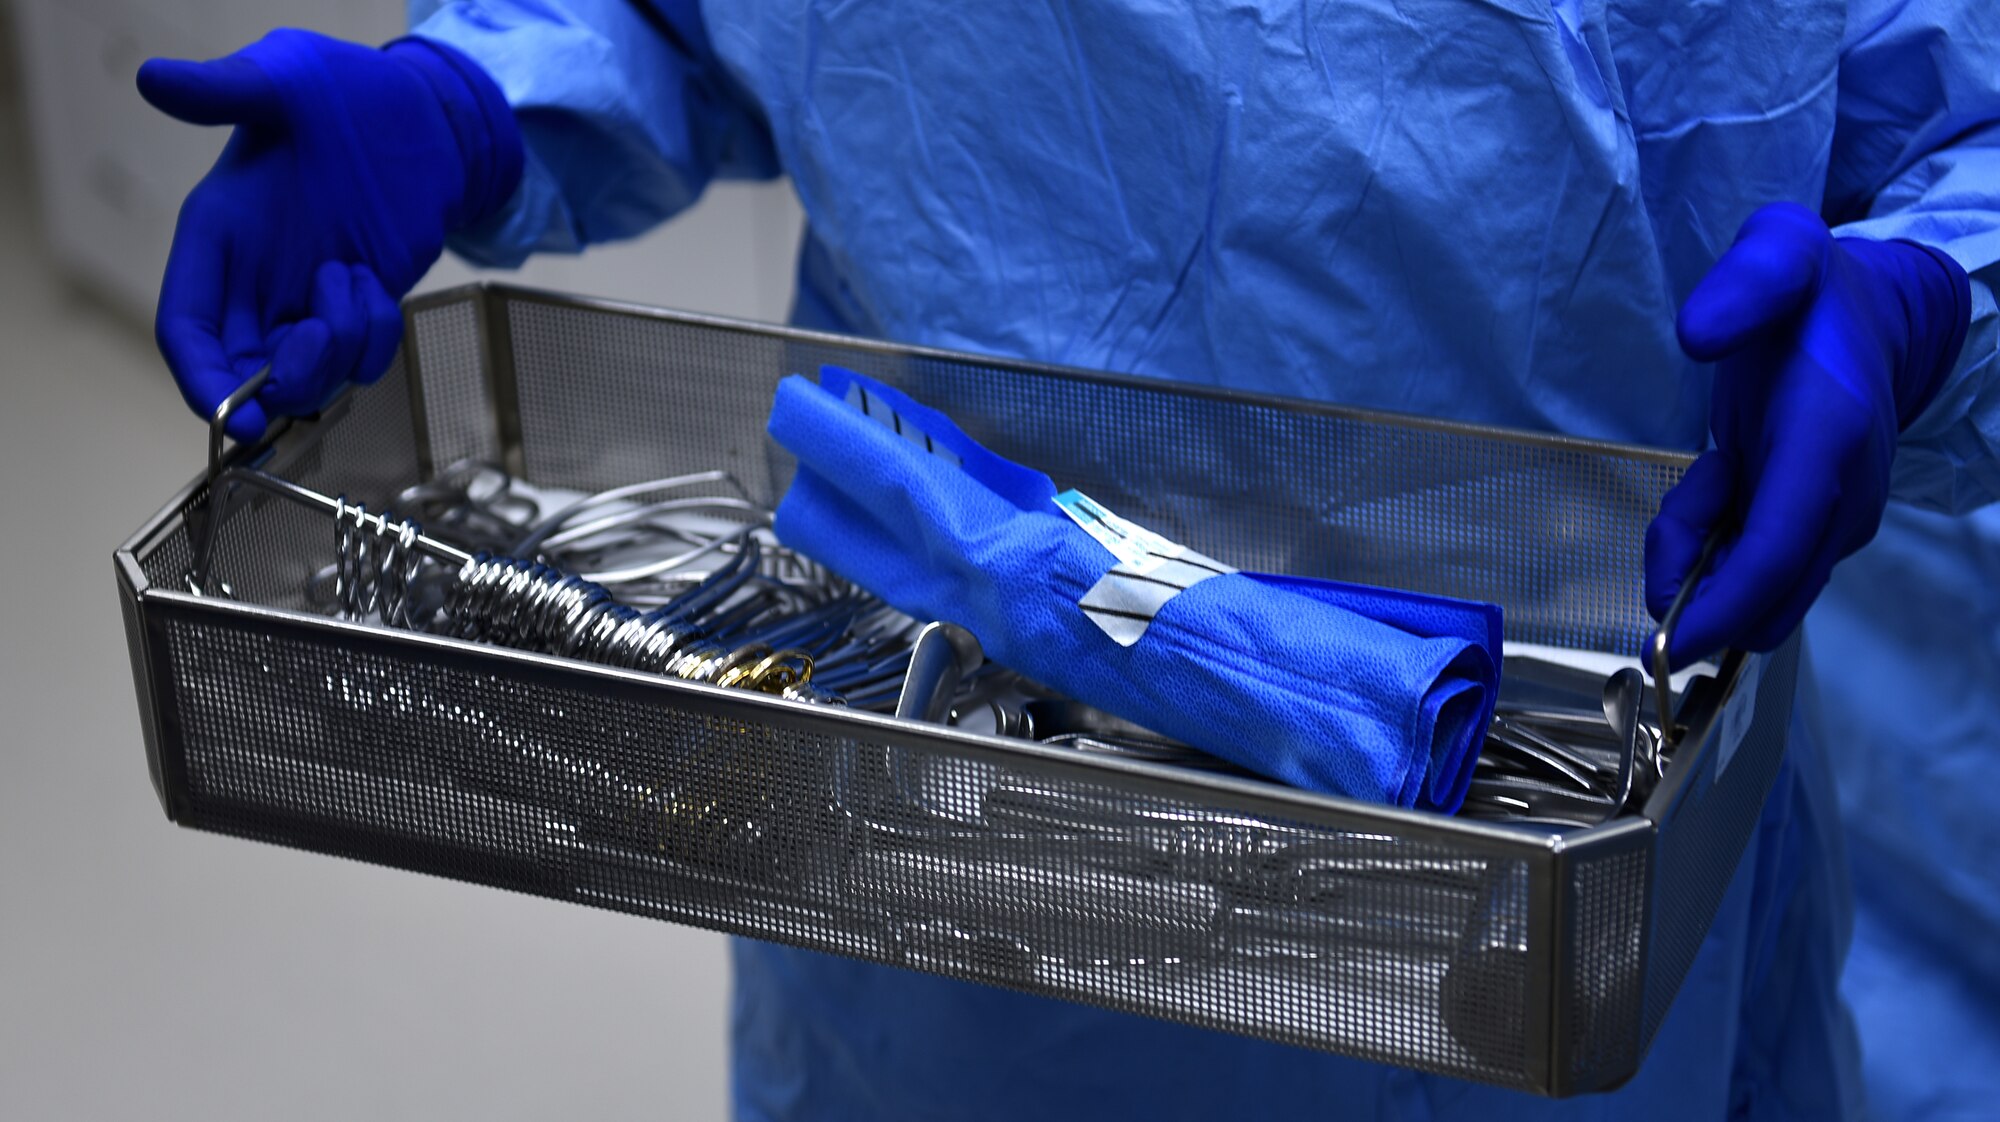 U.S. Air Force Col. Zachery Jiron, 60th Air Mobility Wing vice commander, holds an orthopedic instrument tray Aug. 8, 2019, at David Grant USAF Medical Center Travis Air Force Base, California. As part of the Leadership Rounds program, Jiron participated in a simulated surgery to get a firsthand experience of all the precautions medical staff take before every surgery. (U.S. Air Force photo by Airman 1st Class Cameron Otte)